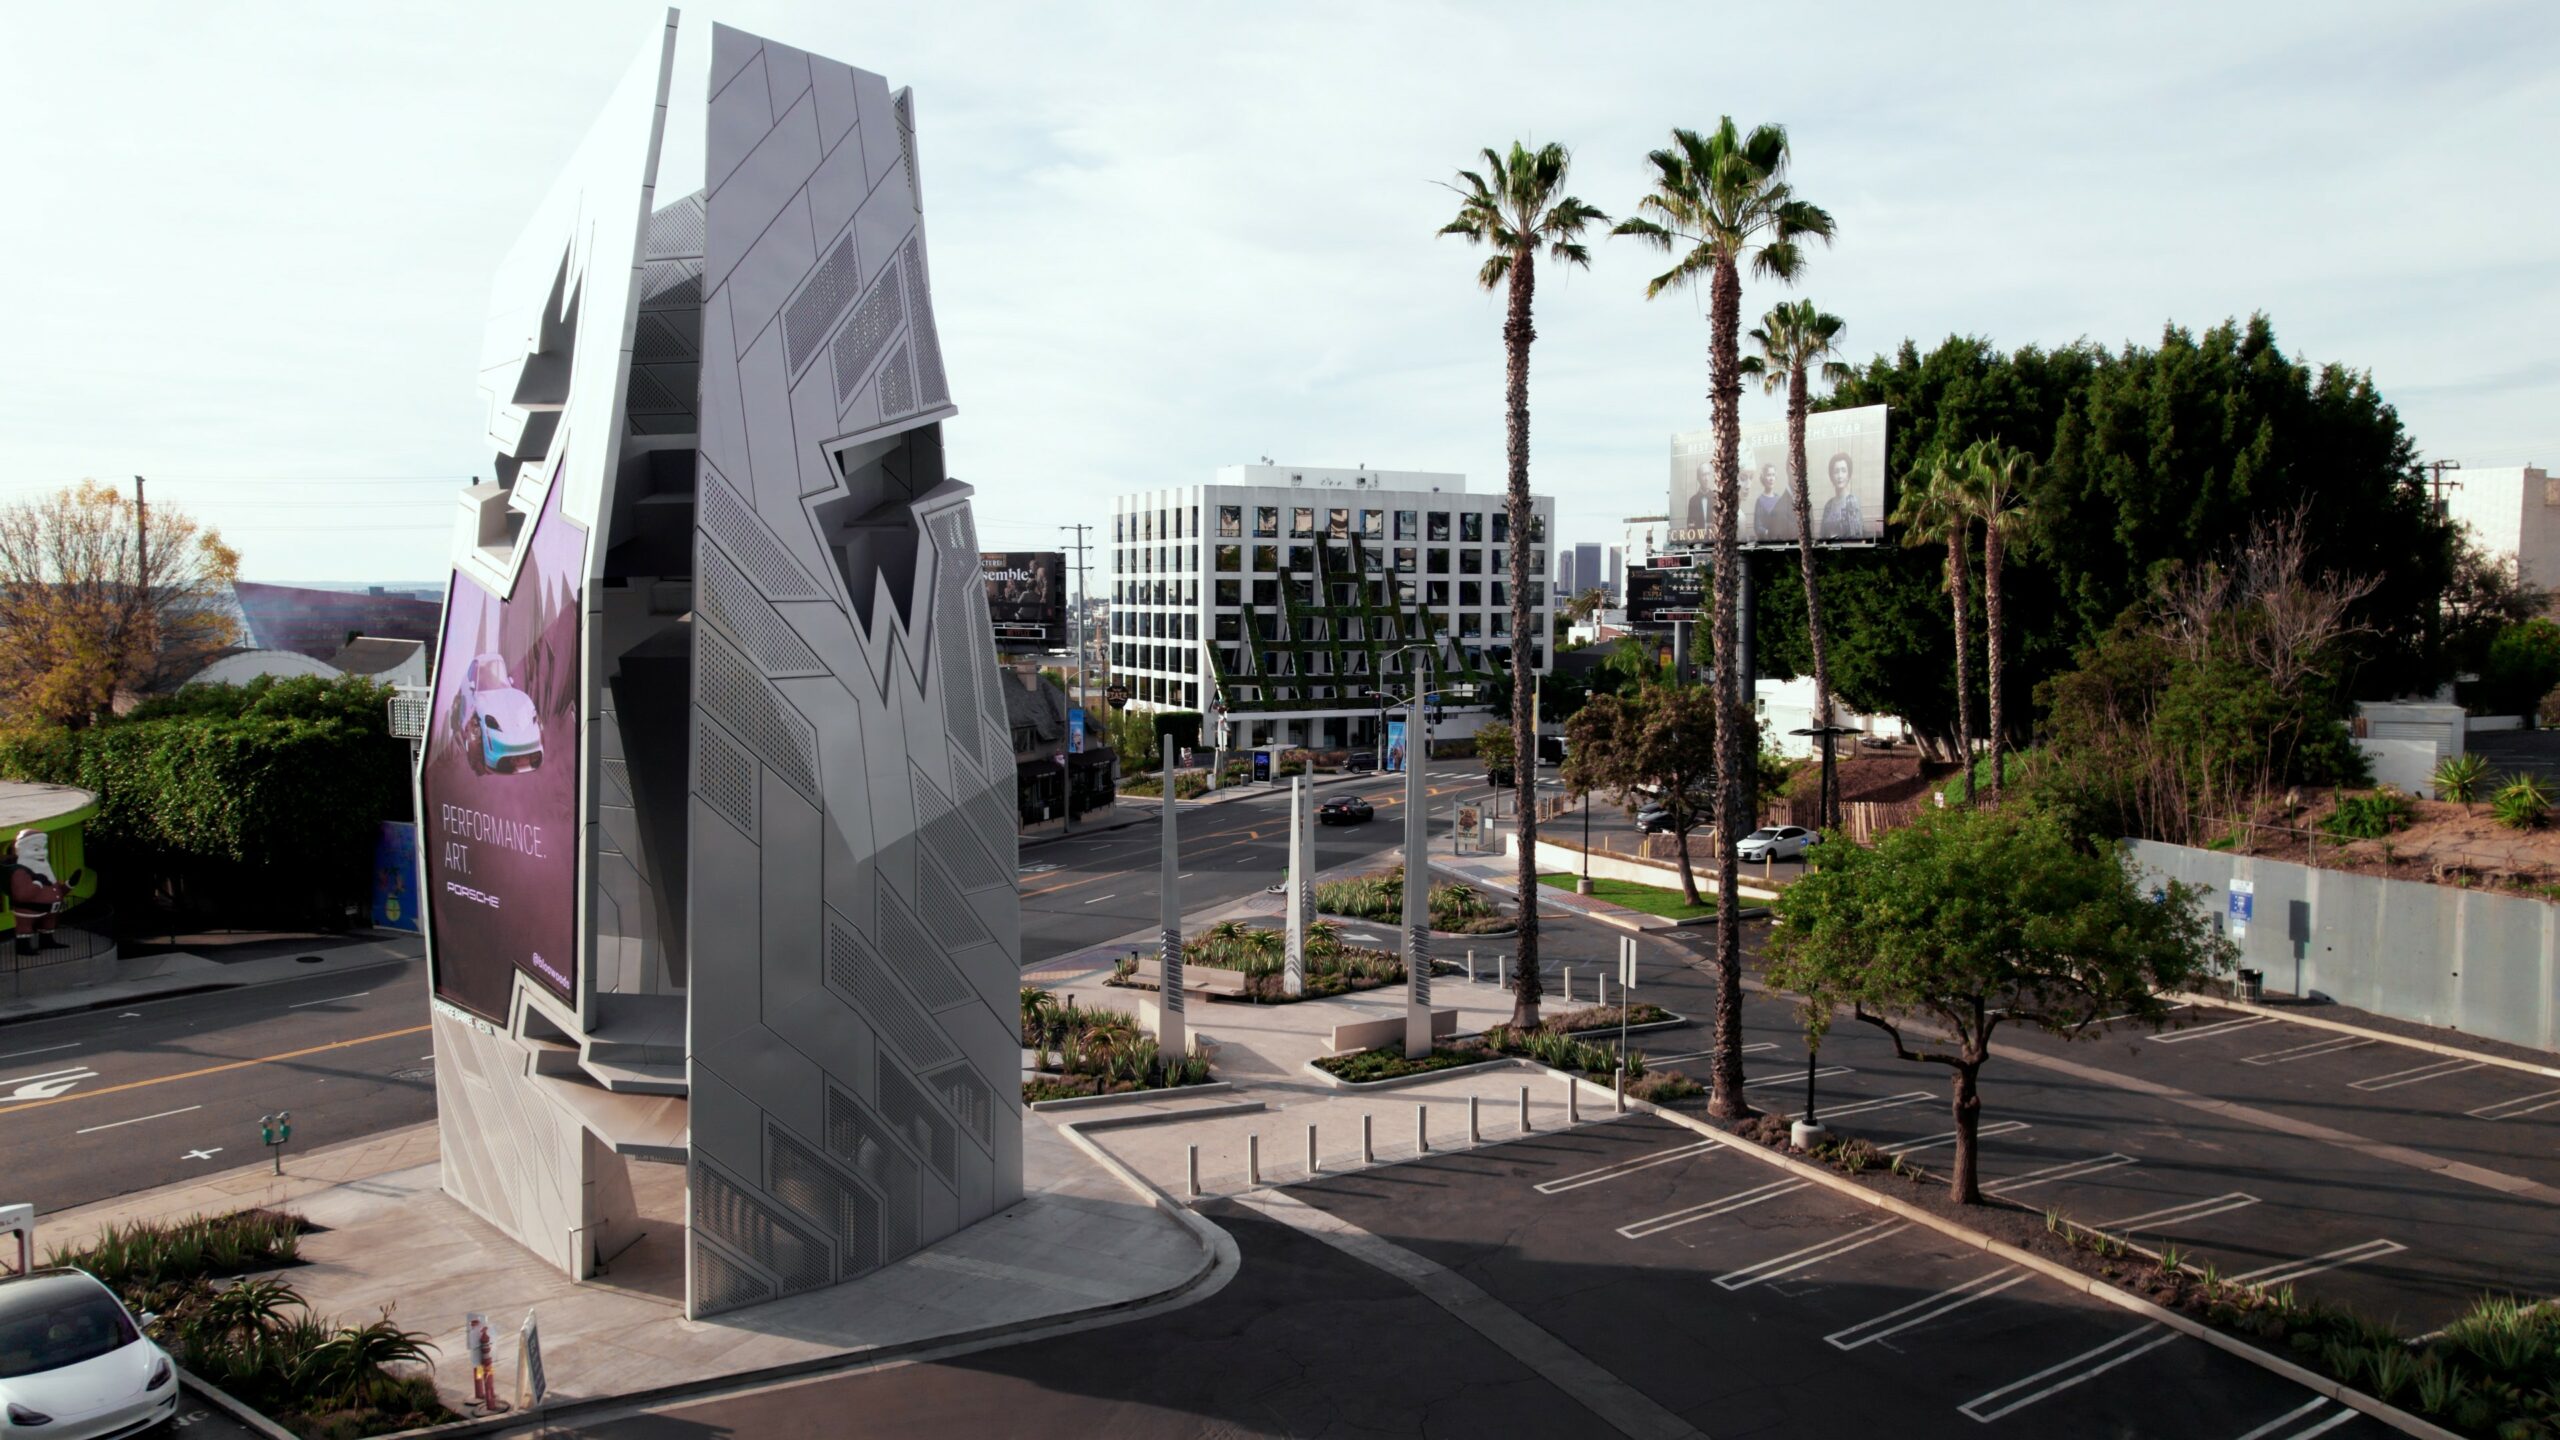 Futuristic building facade with palm trees and parked cars.